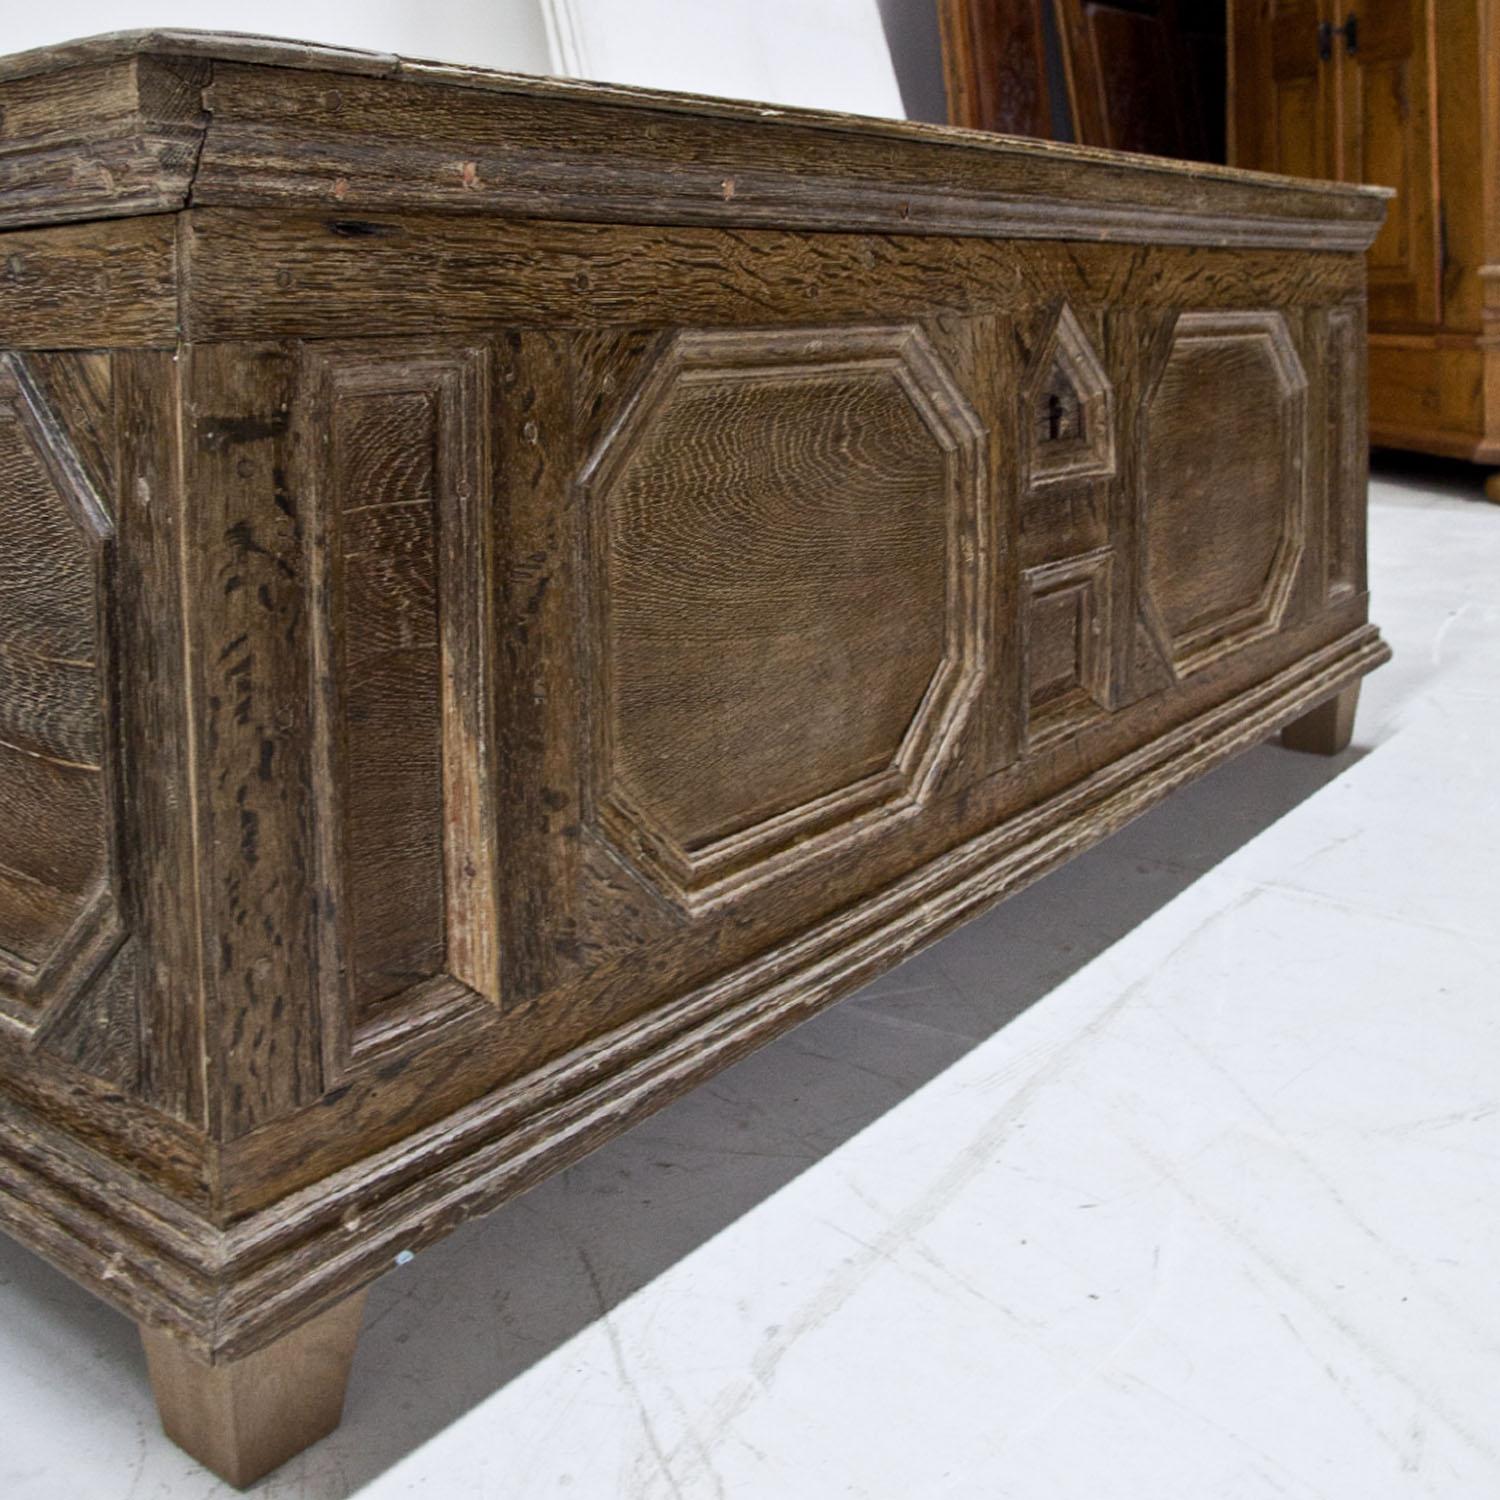 Large oak chest with a hinged lid and octagonal fillings on front, sides and top.